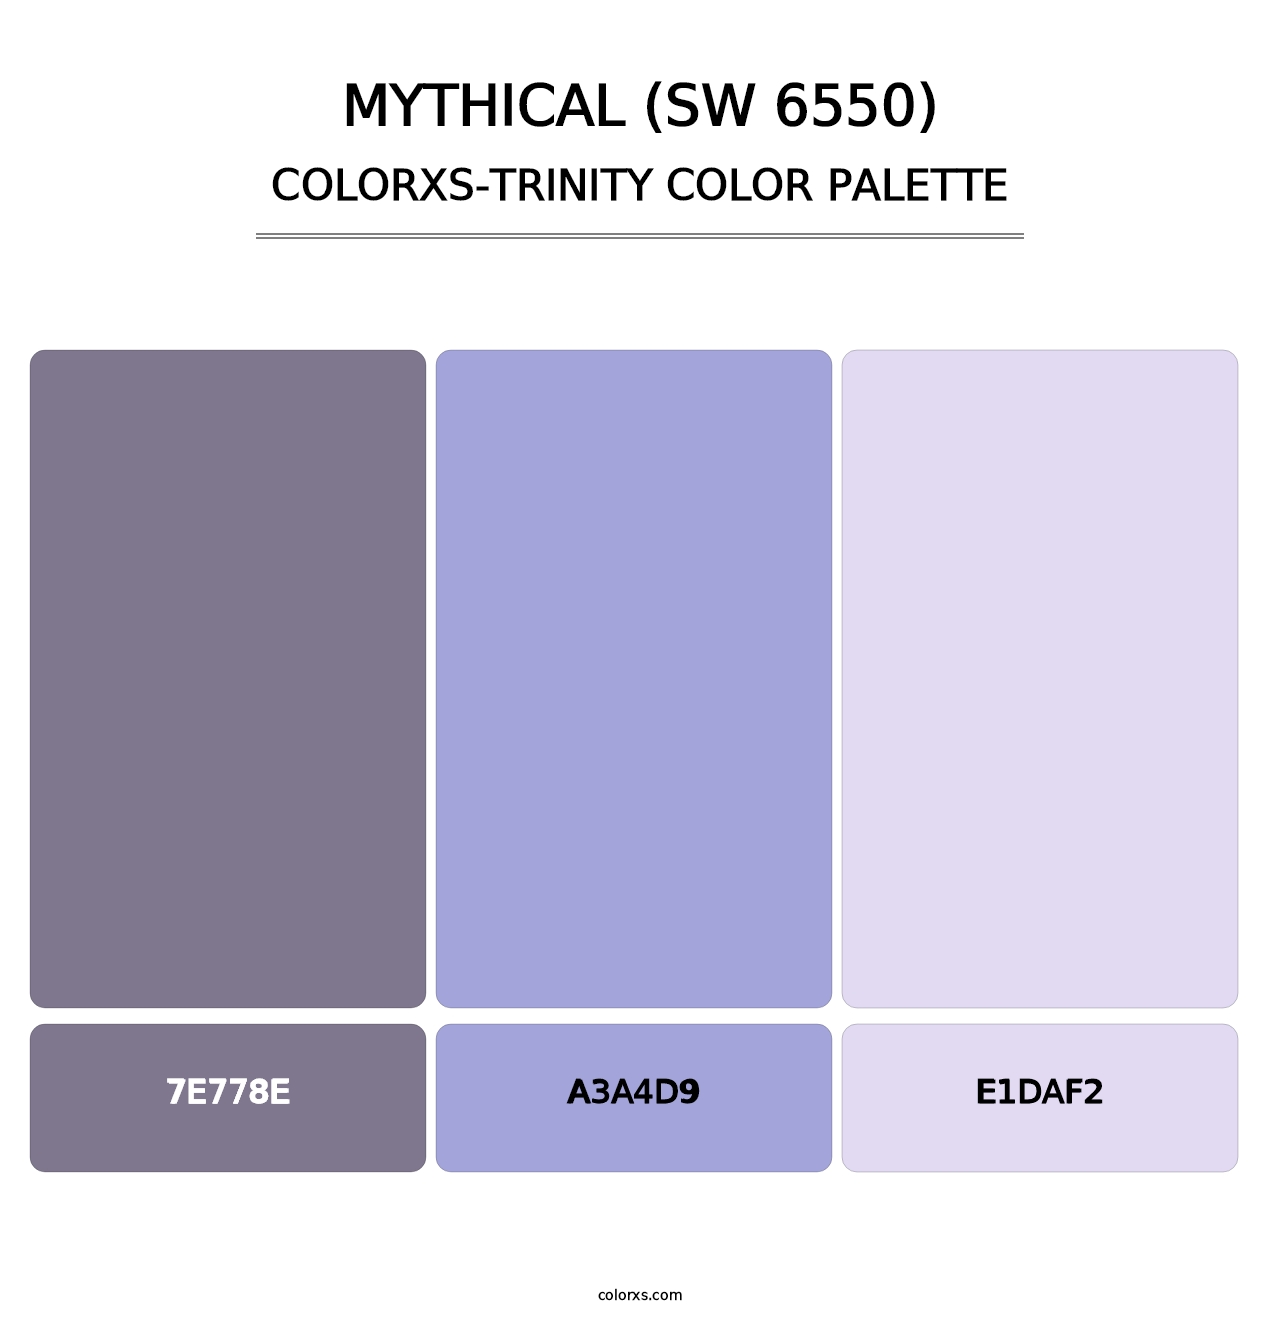 Mythical (SW 6550) - Colorxs Trinity Palette